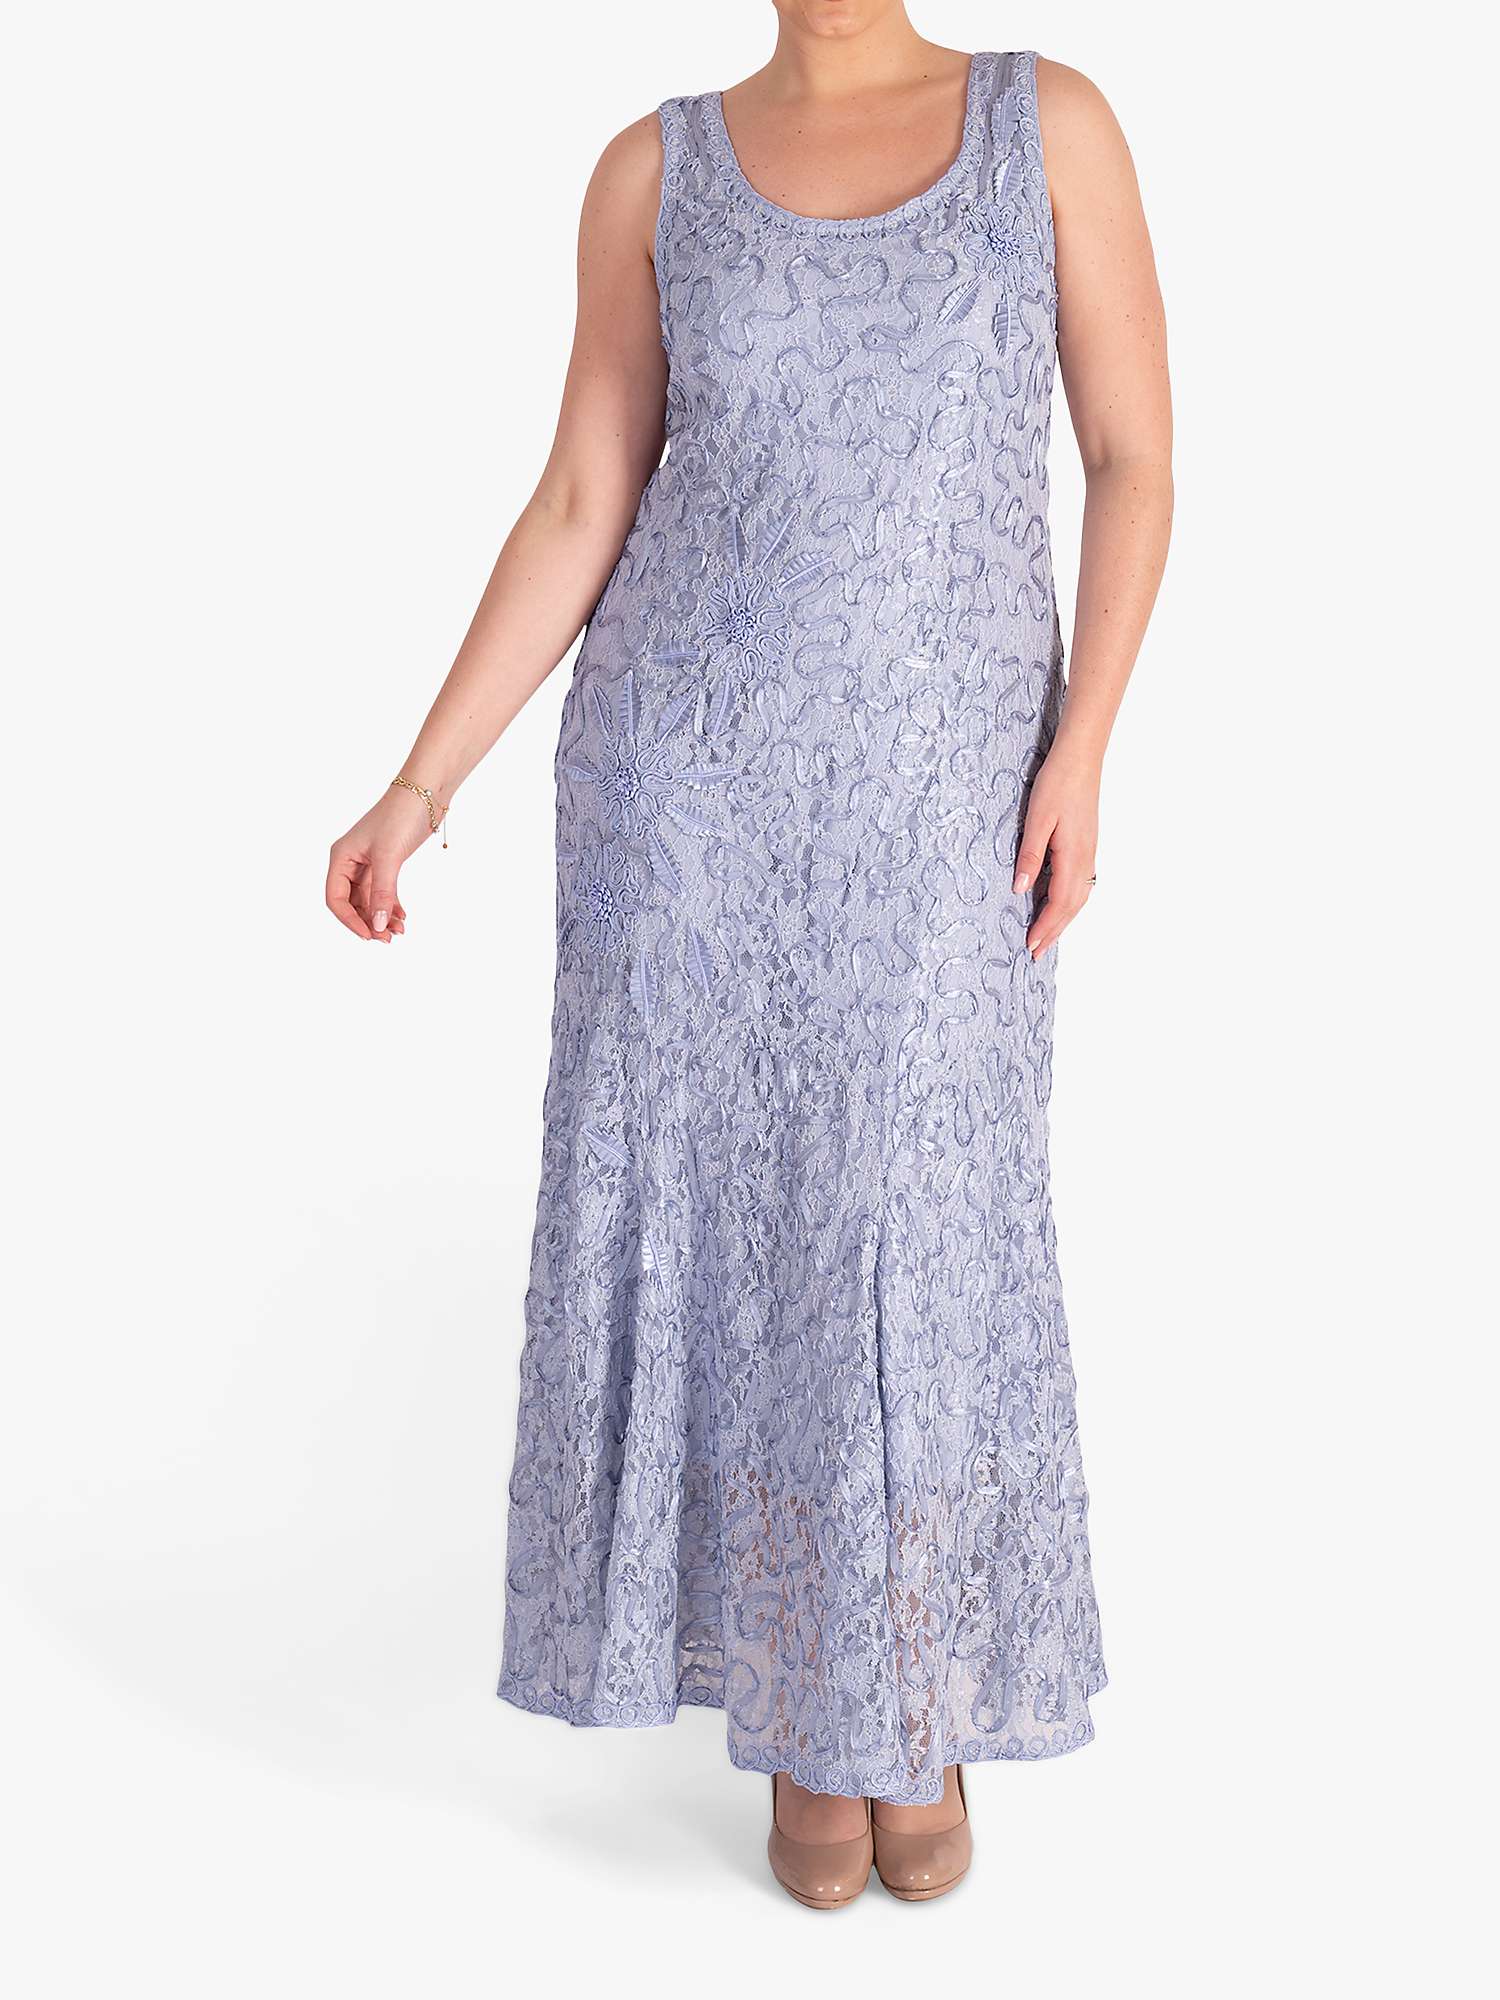 Buy chesca Lace & Cornelli Tapework Dress, Lilac Online at johnlewis.com